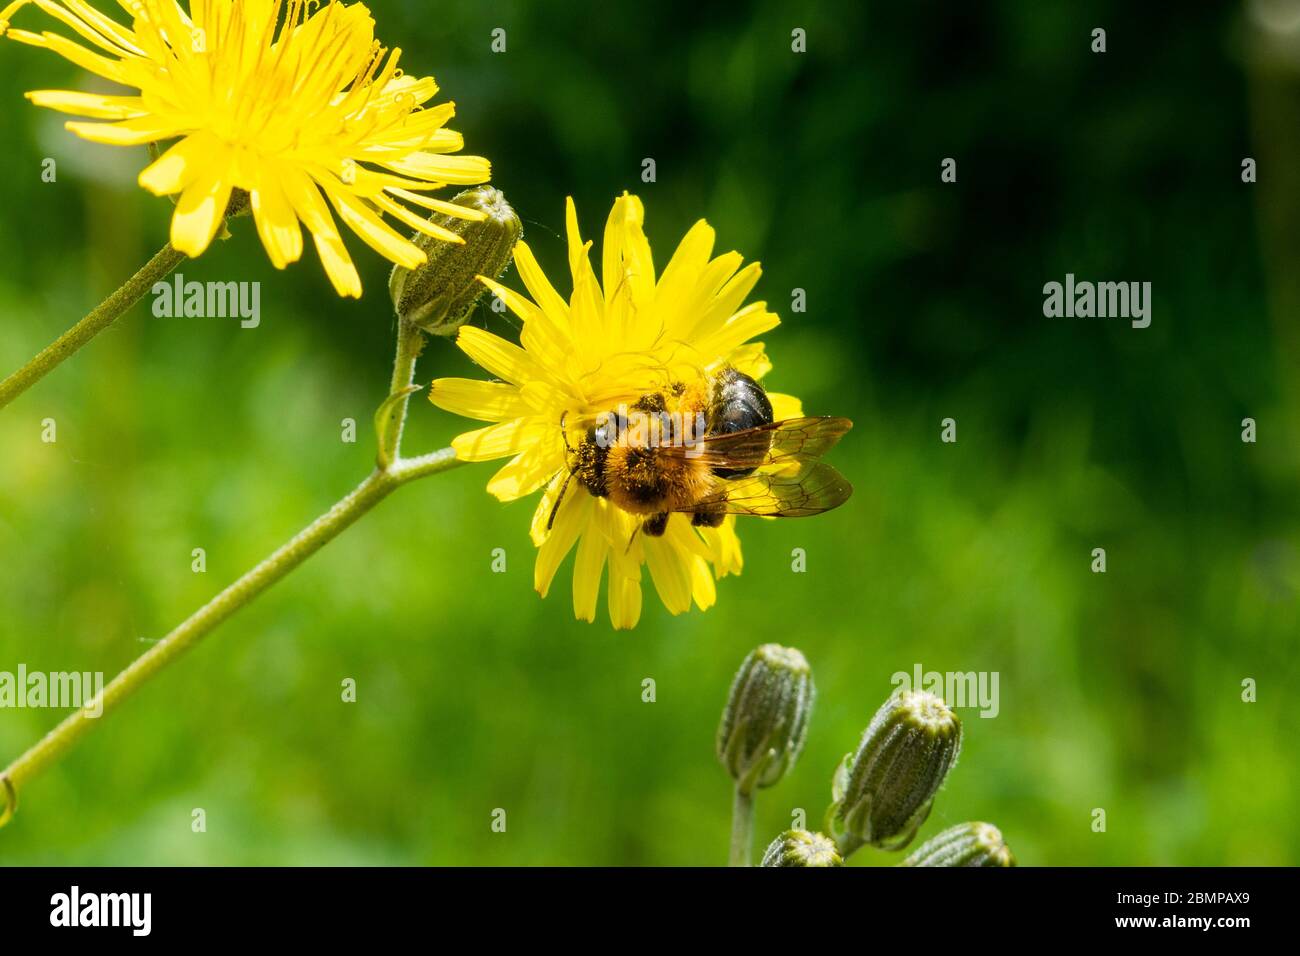 A mining bee andrena sp feeding and gathering pollen from a hawksbeard flower  crepis sp Stock Photo